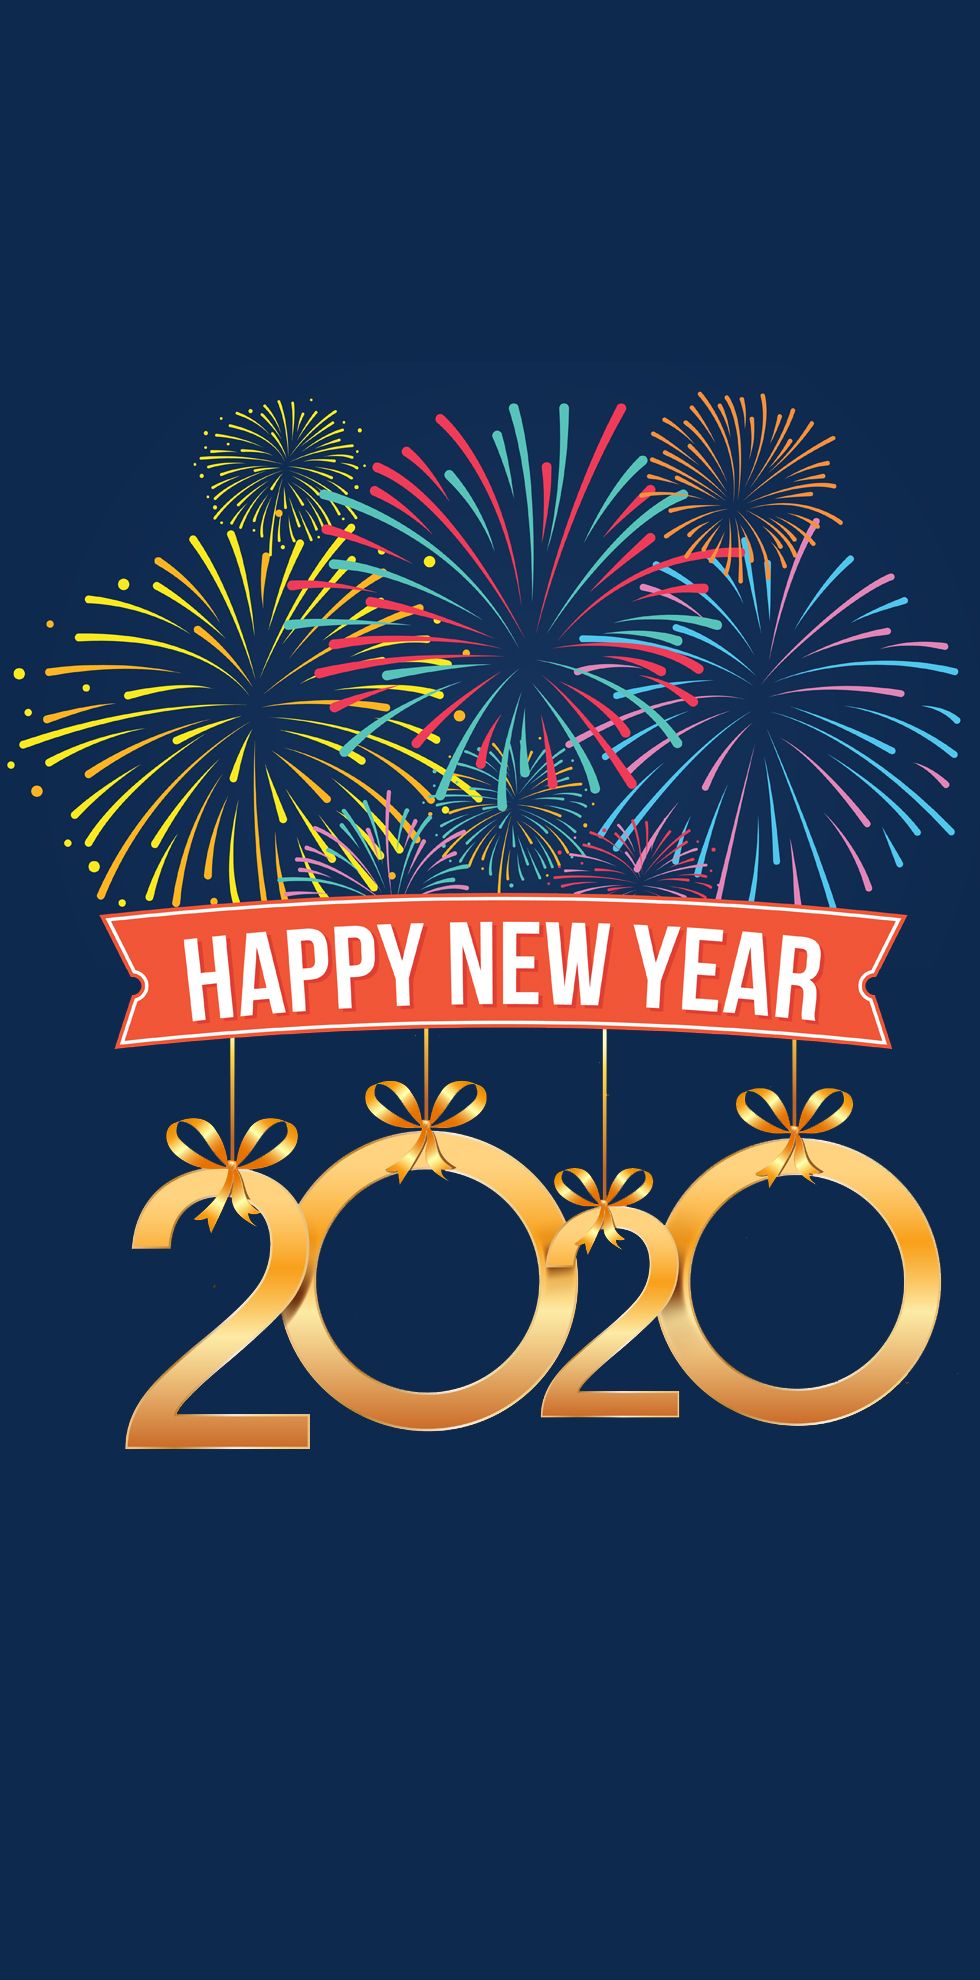 Download 2020 happy new year mobile wallpaper for your Android